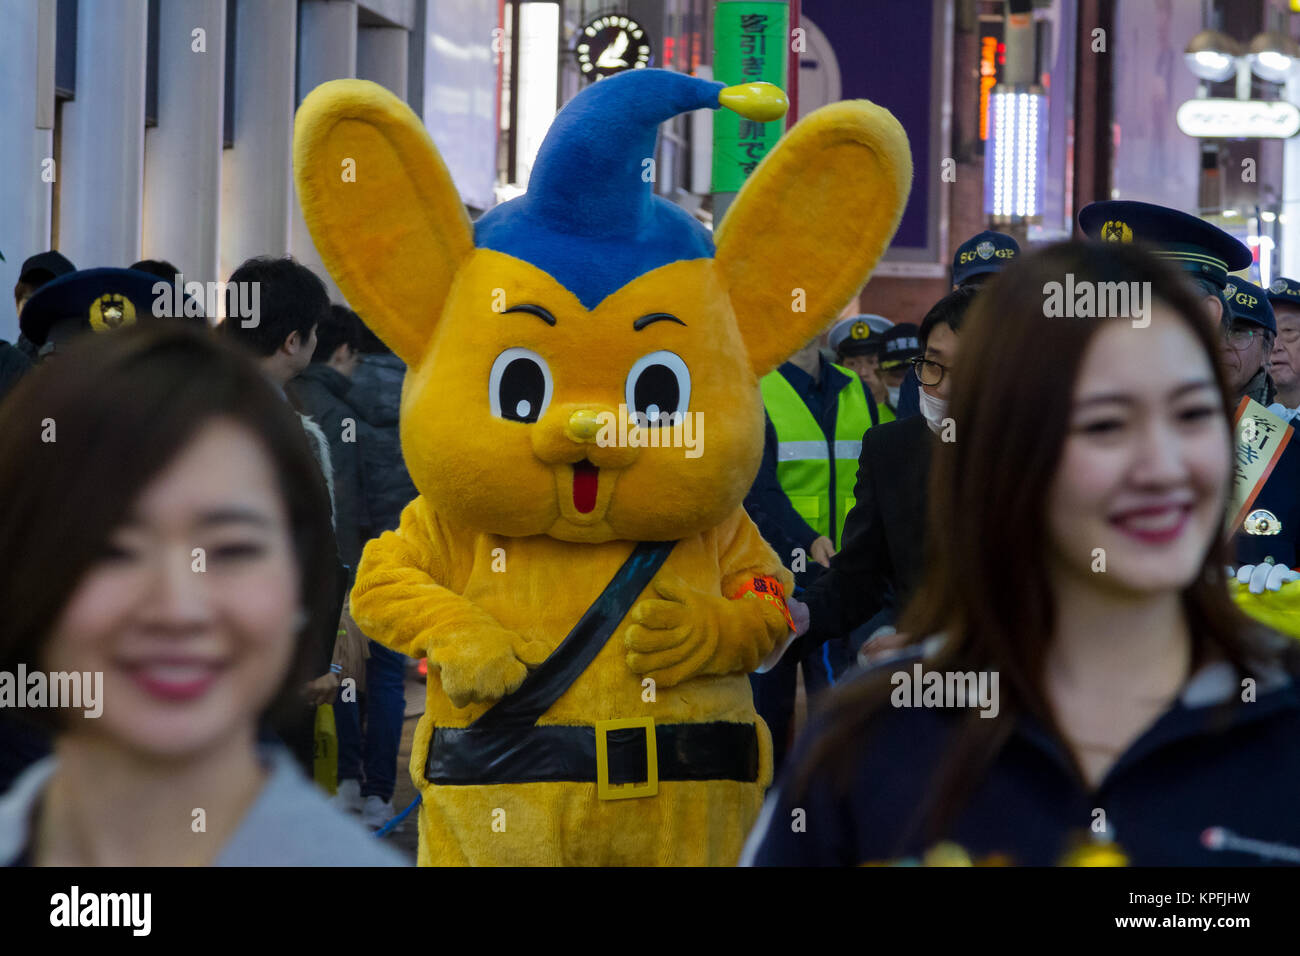 Japanese police mascot, Pipo Kun takes place in an event in Shibuya, Tokyo, Japan. Stock Photo